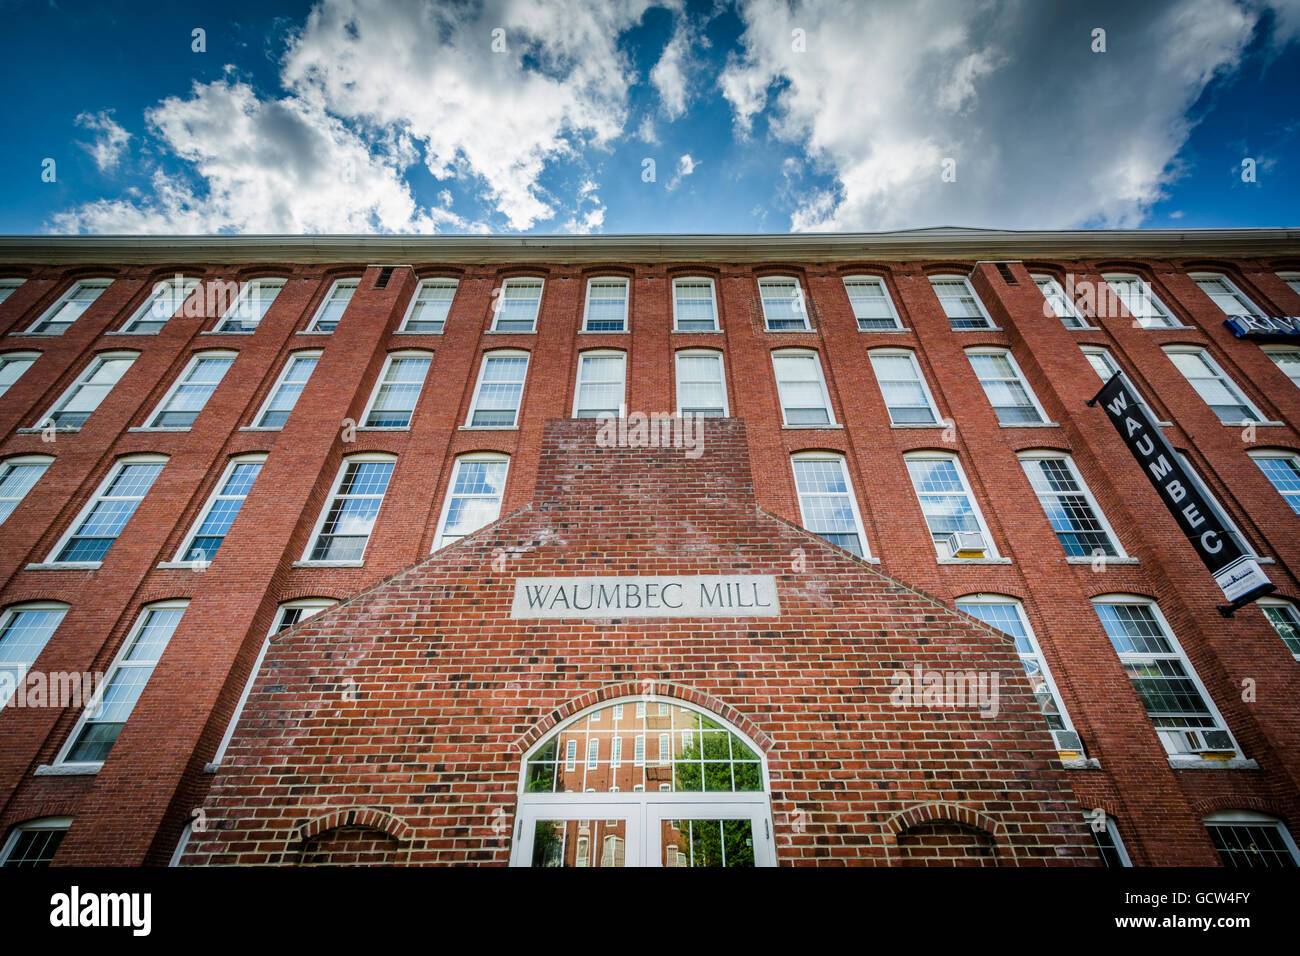 Waumbec Mill, in Manchester, New Hampshire. Stock Photo